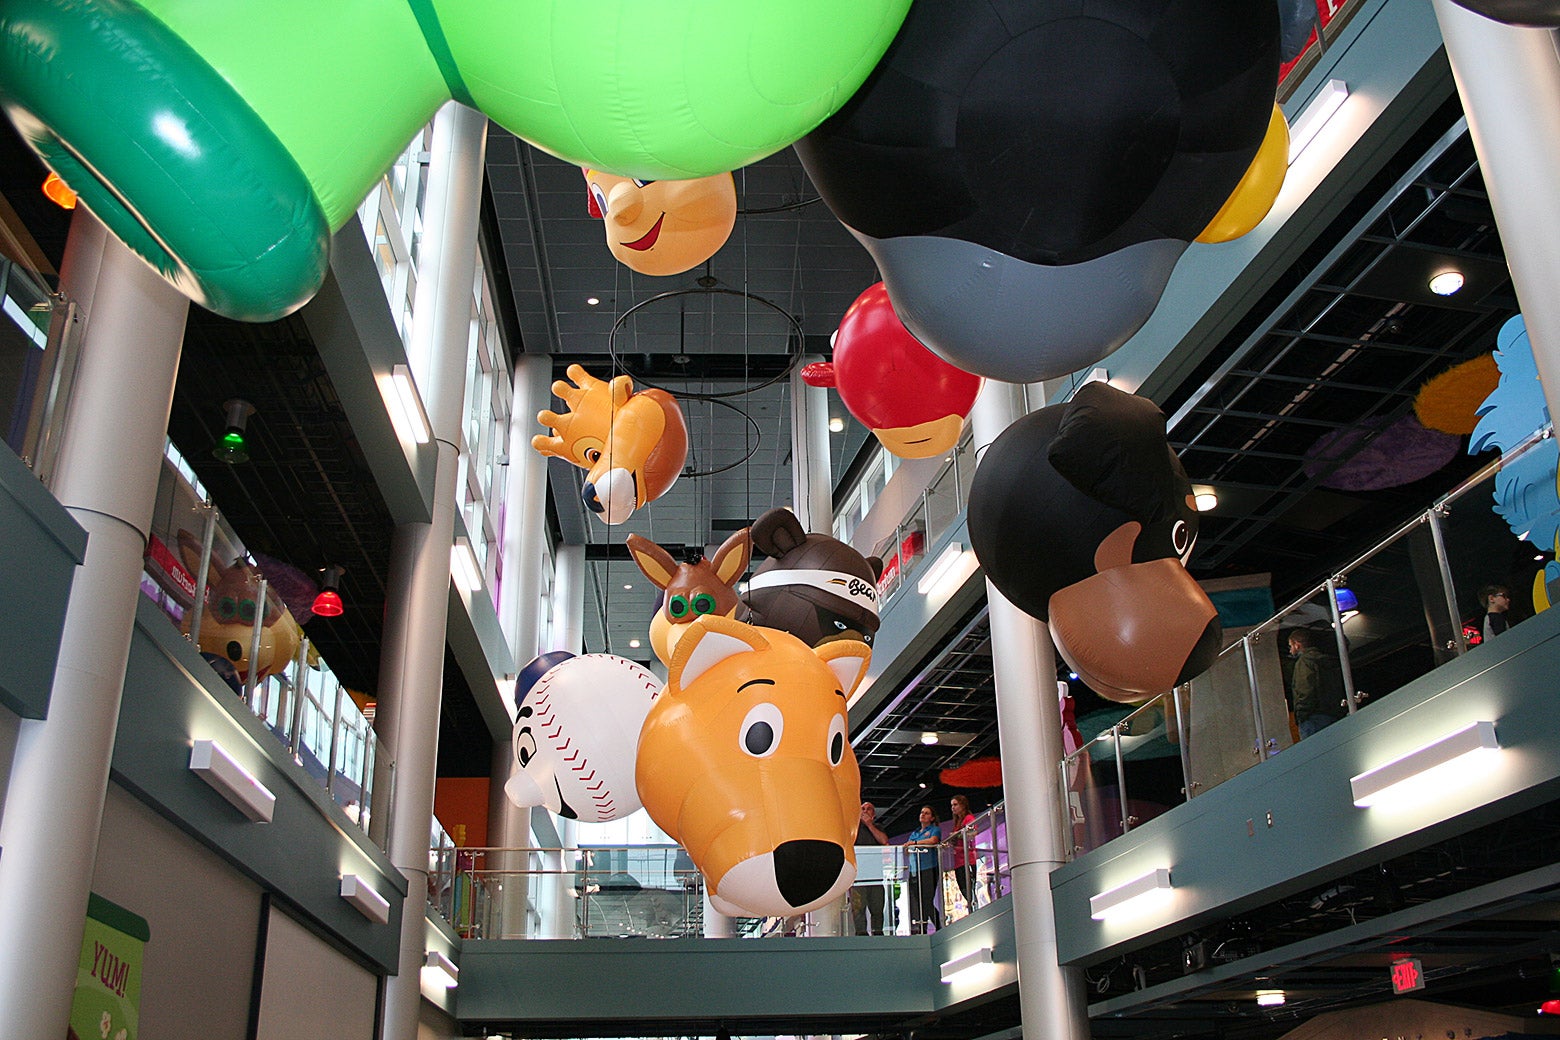 Mascot balloons hanging from the ceiling at the Mascot Hall of Fame.